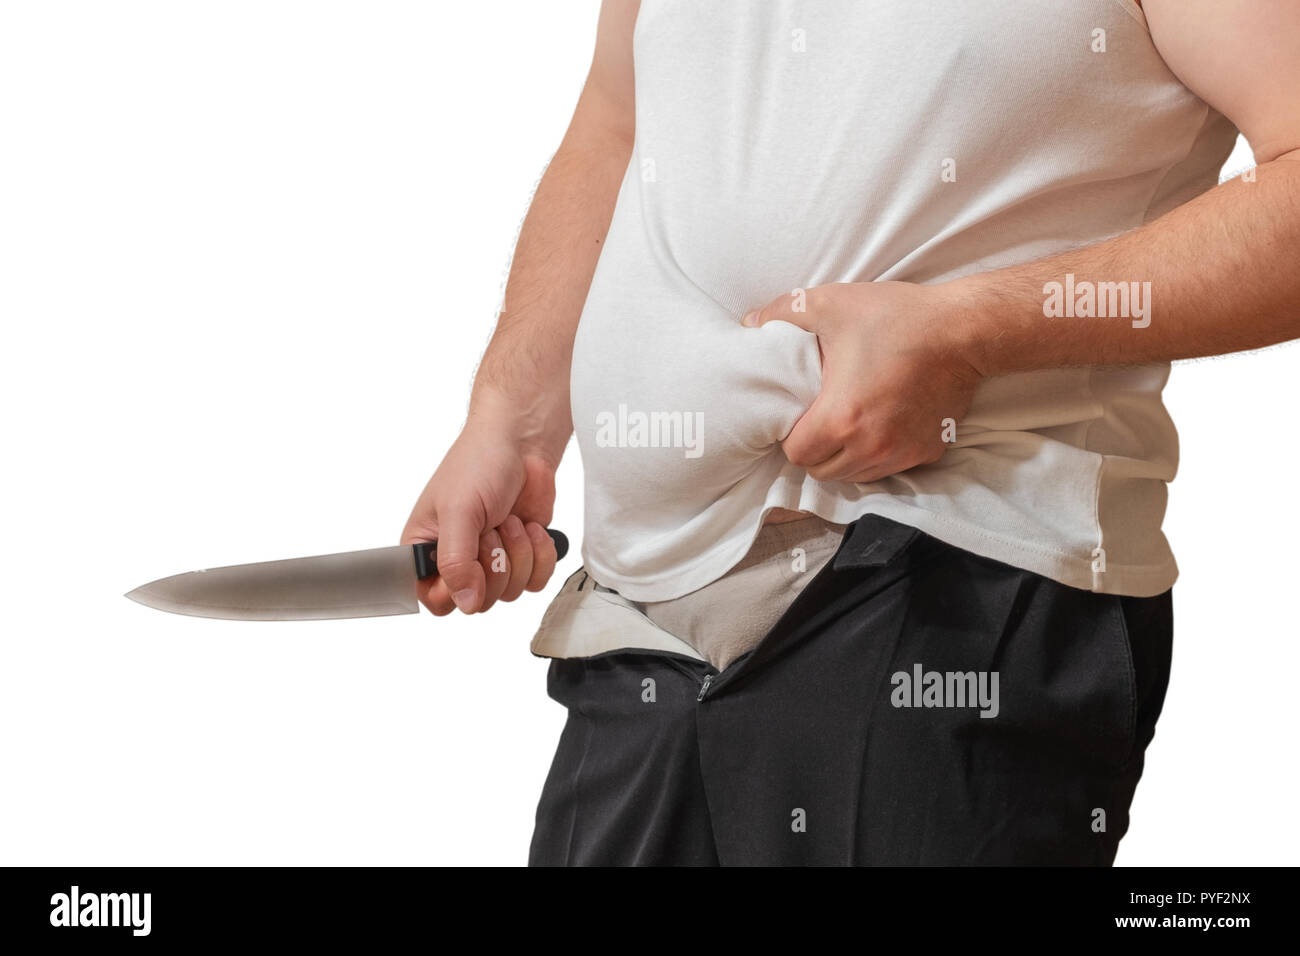 A man with one hand holds the fat fold on his big belly, and in the other hand holds a knife, as if wanting to remove it. Stock Photo